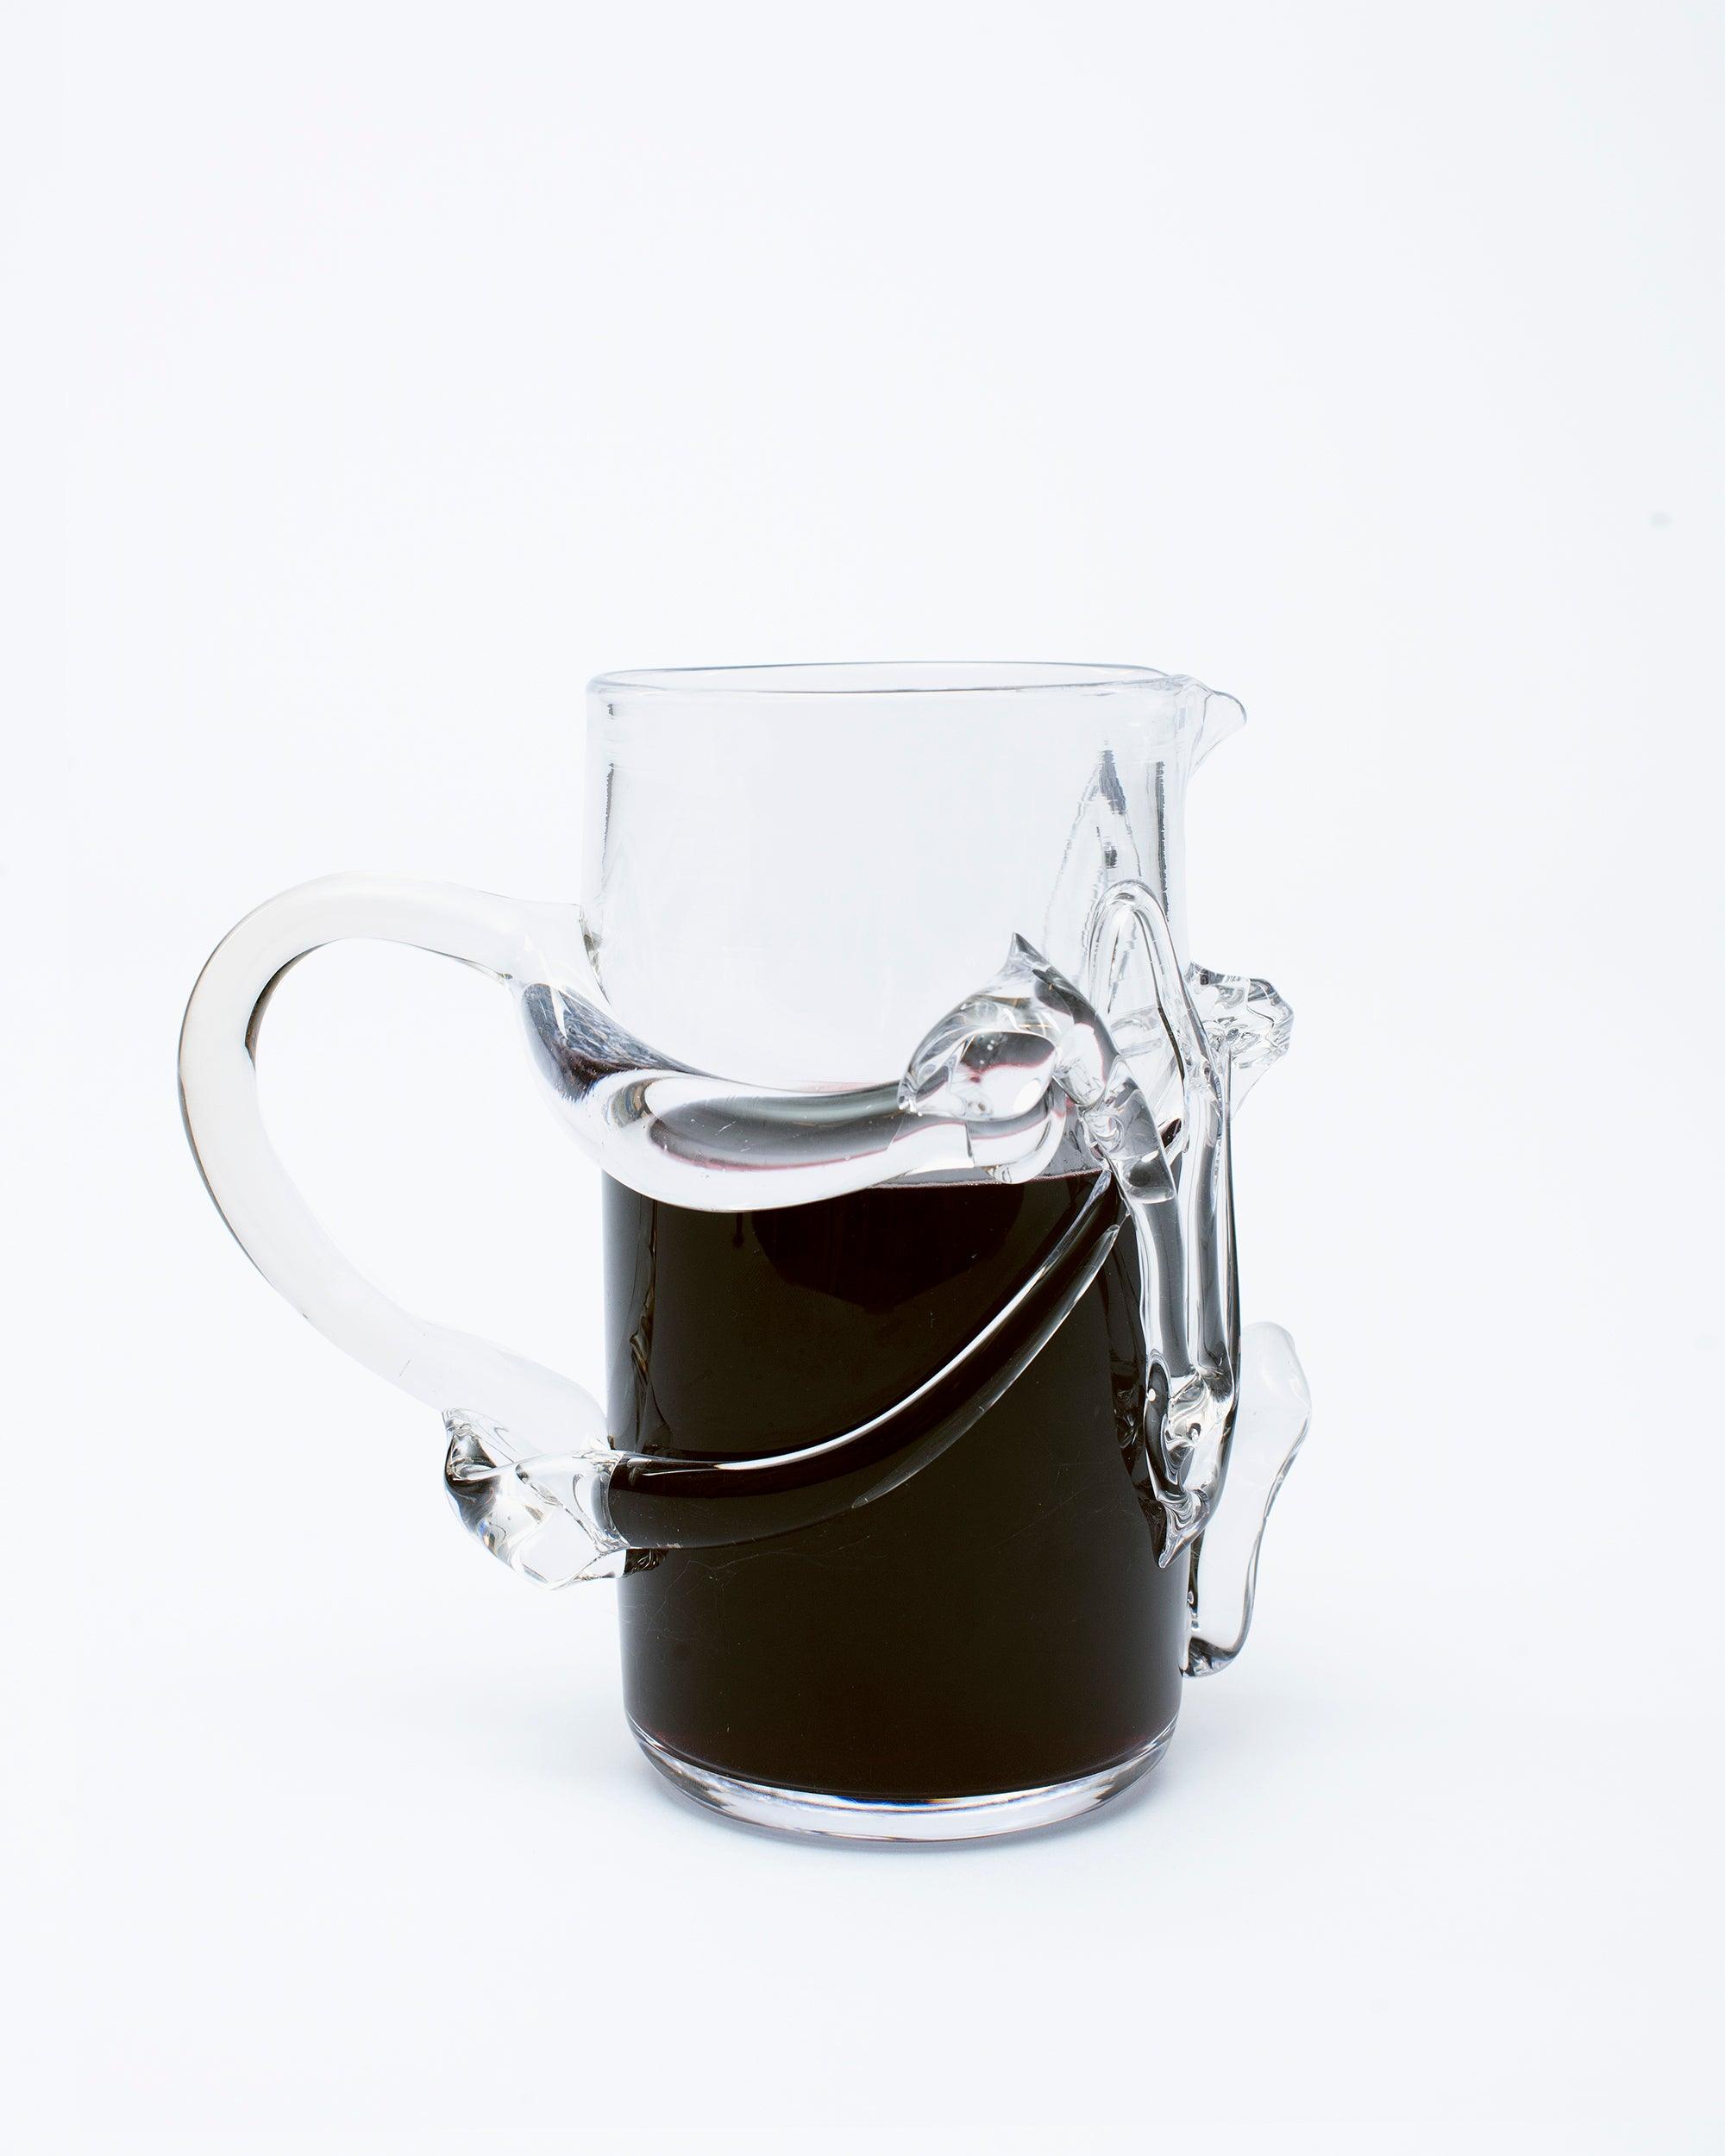 Glass pitcher with melted glass details with handle on the left side with red wine on white background